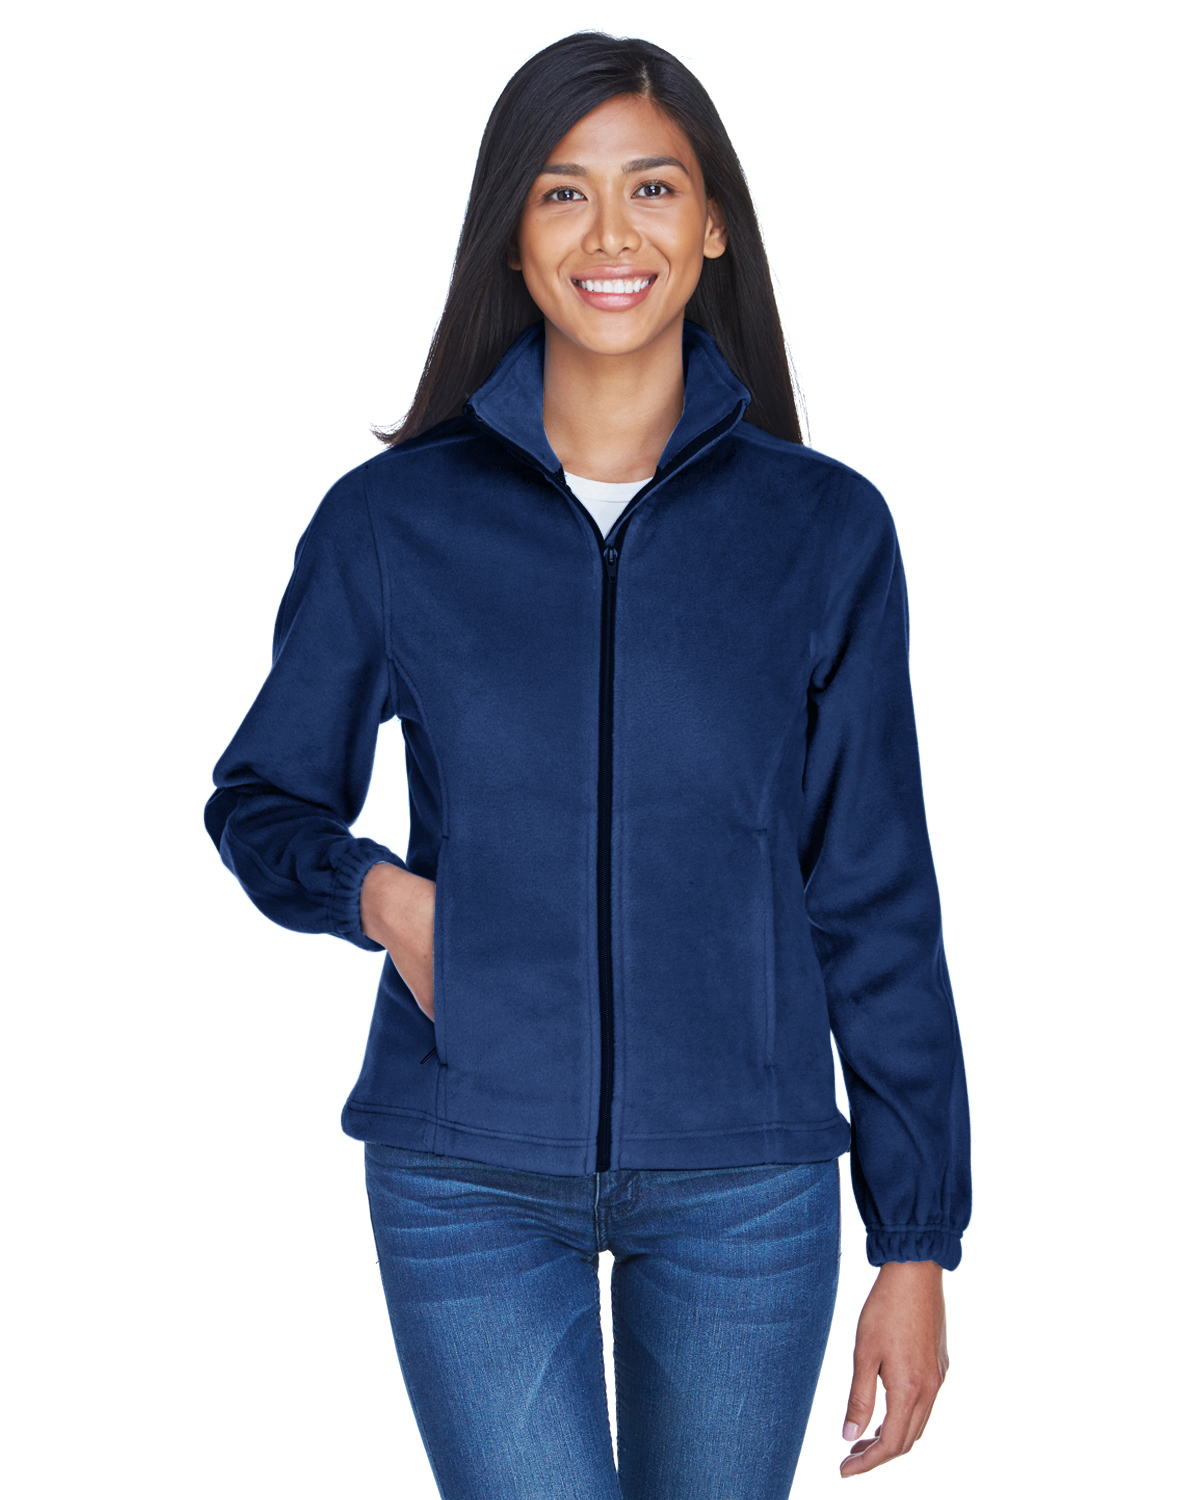 Polyester Jackets In Navy | Fast & Free Shipping At $59 | Jiffy